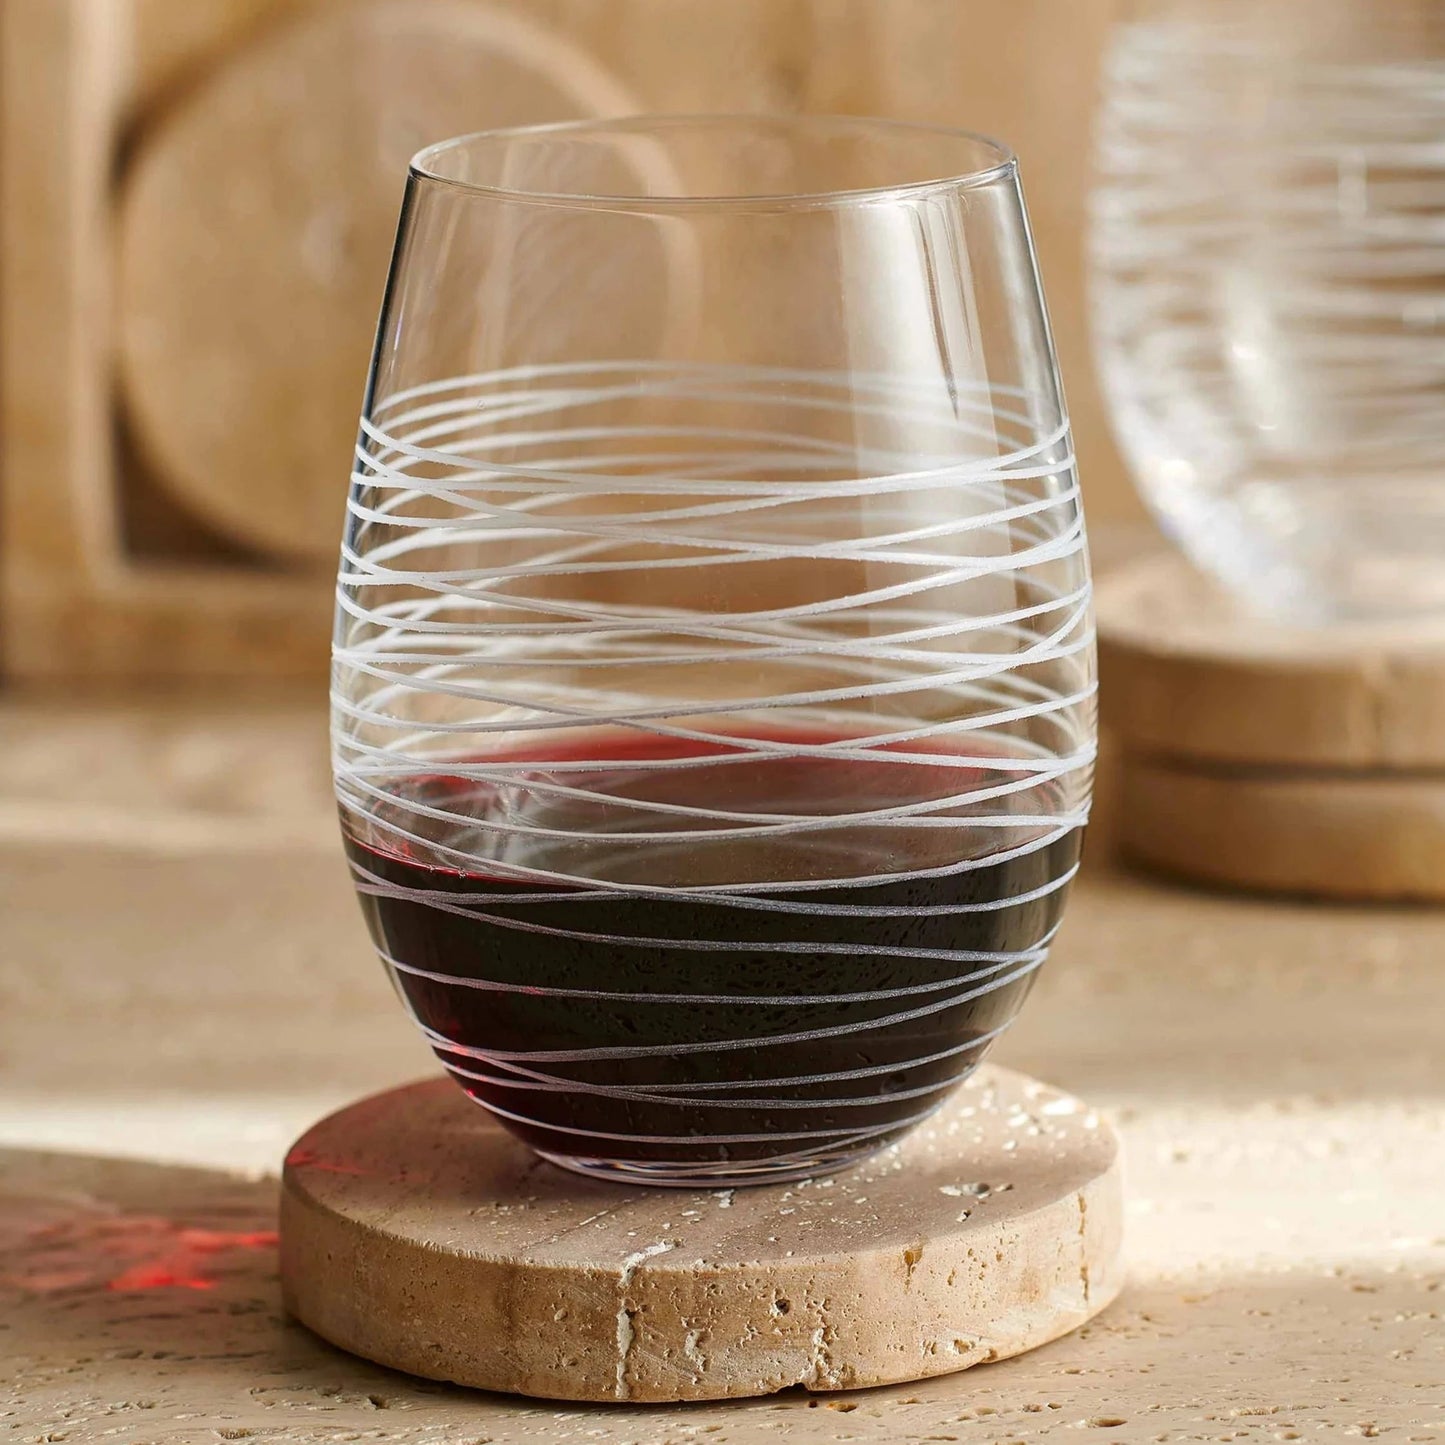 https://cdn.shopify.com/s/files/1/0275/1876/3088/products/solis-stemless-wine-glass-set-of-4-705086_1445x.webp?v=1675817762